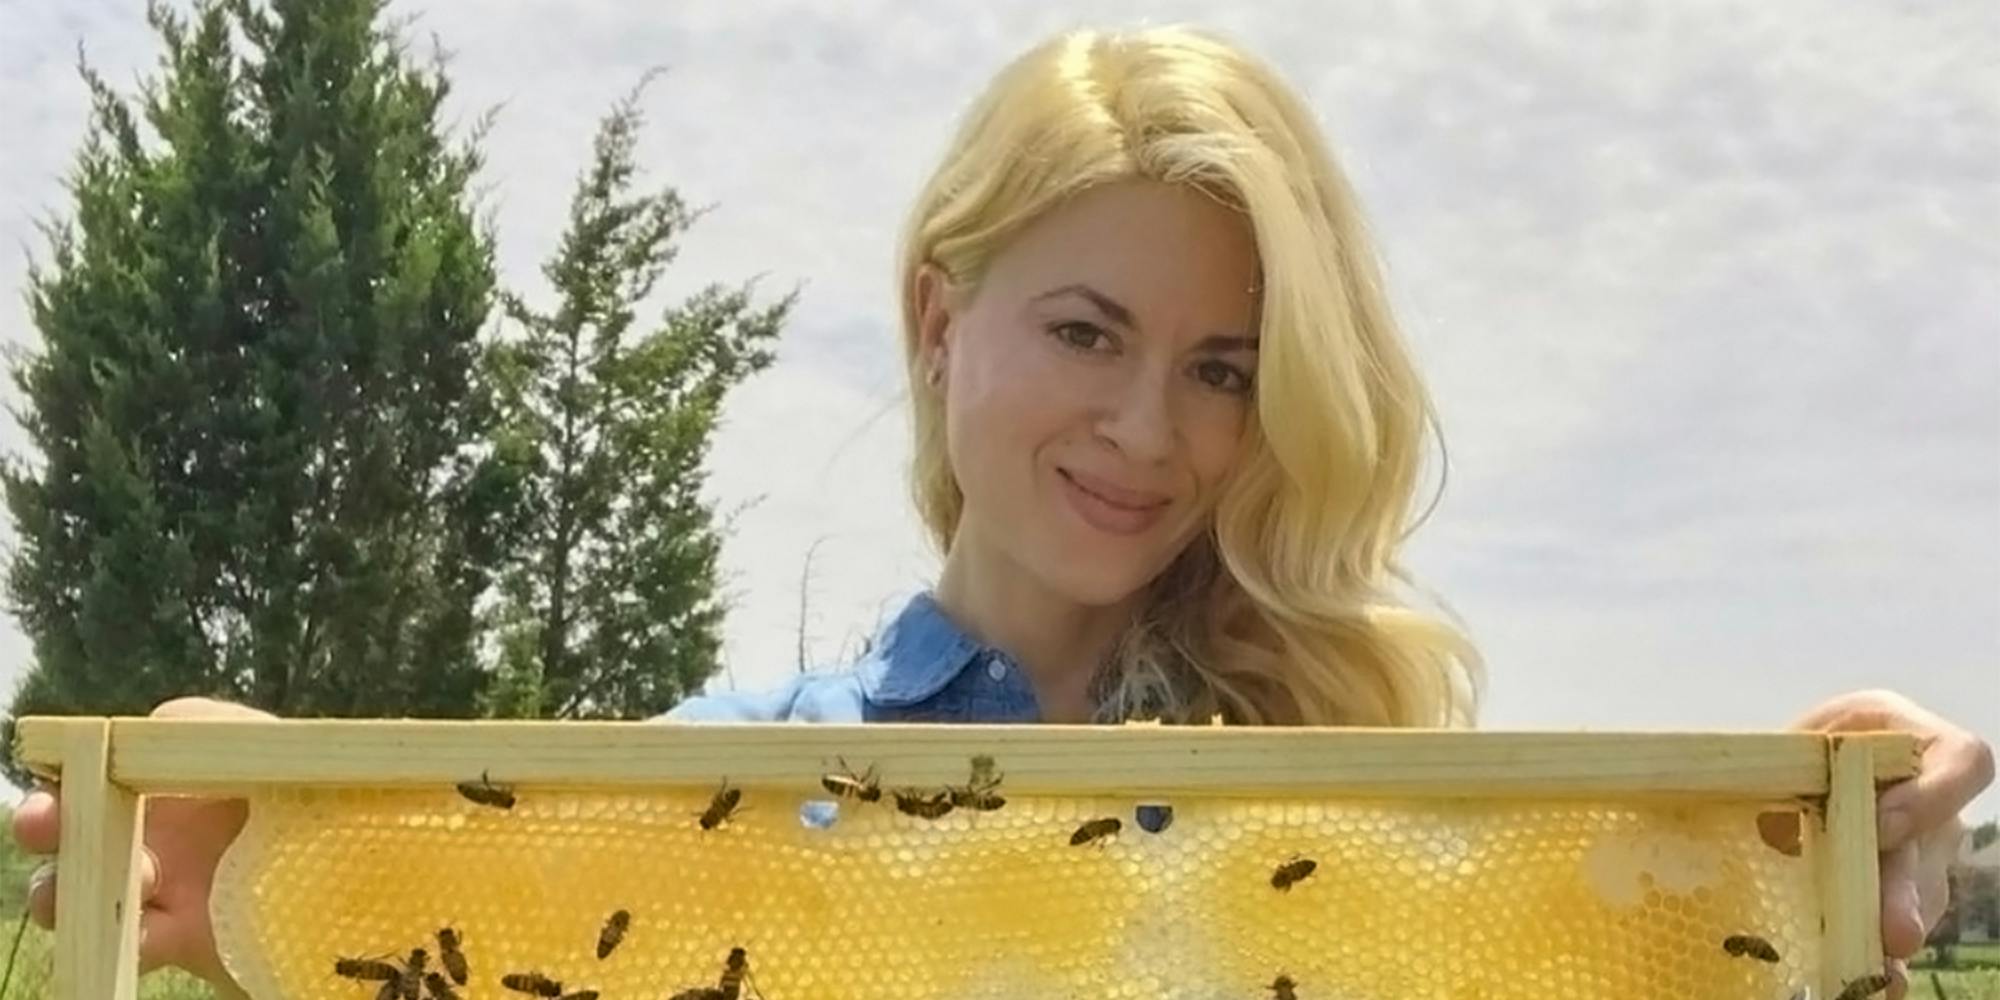 Women behind the lens: the female beekeepers who hold 'the keys to